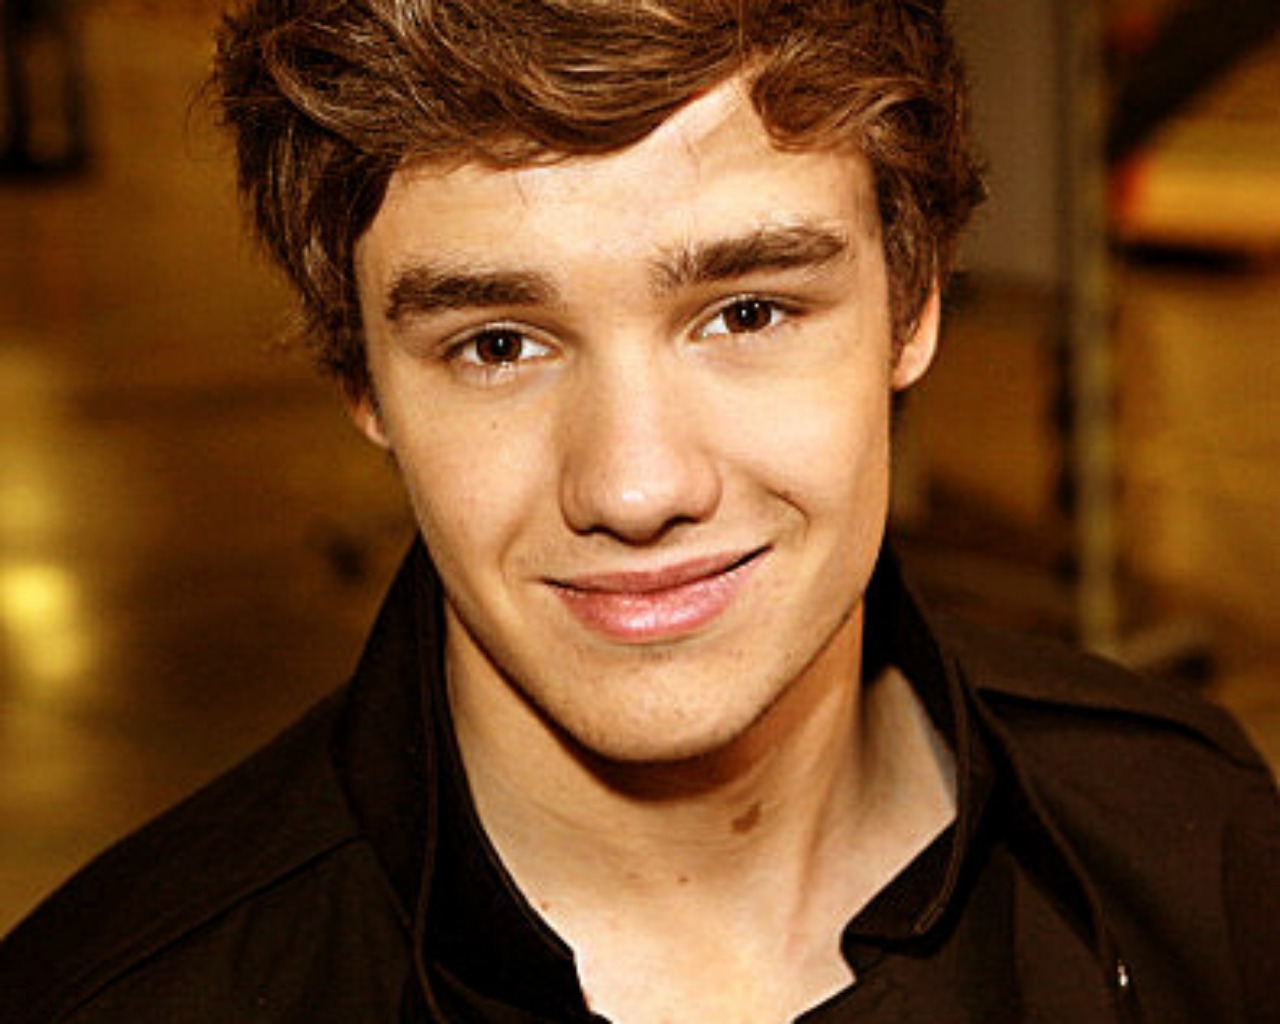 Liam Payne One Direction 2013 Hd Wallpapers - Liam Payne 2011 - HD Wallpaper 